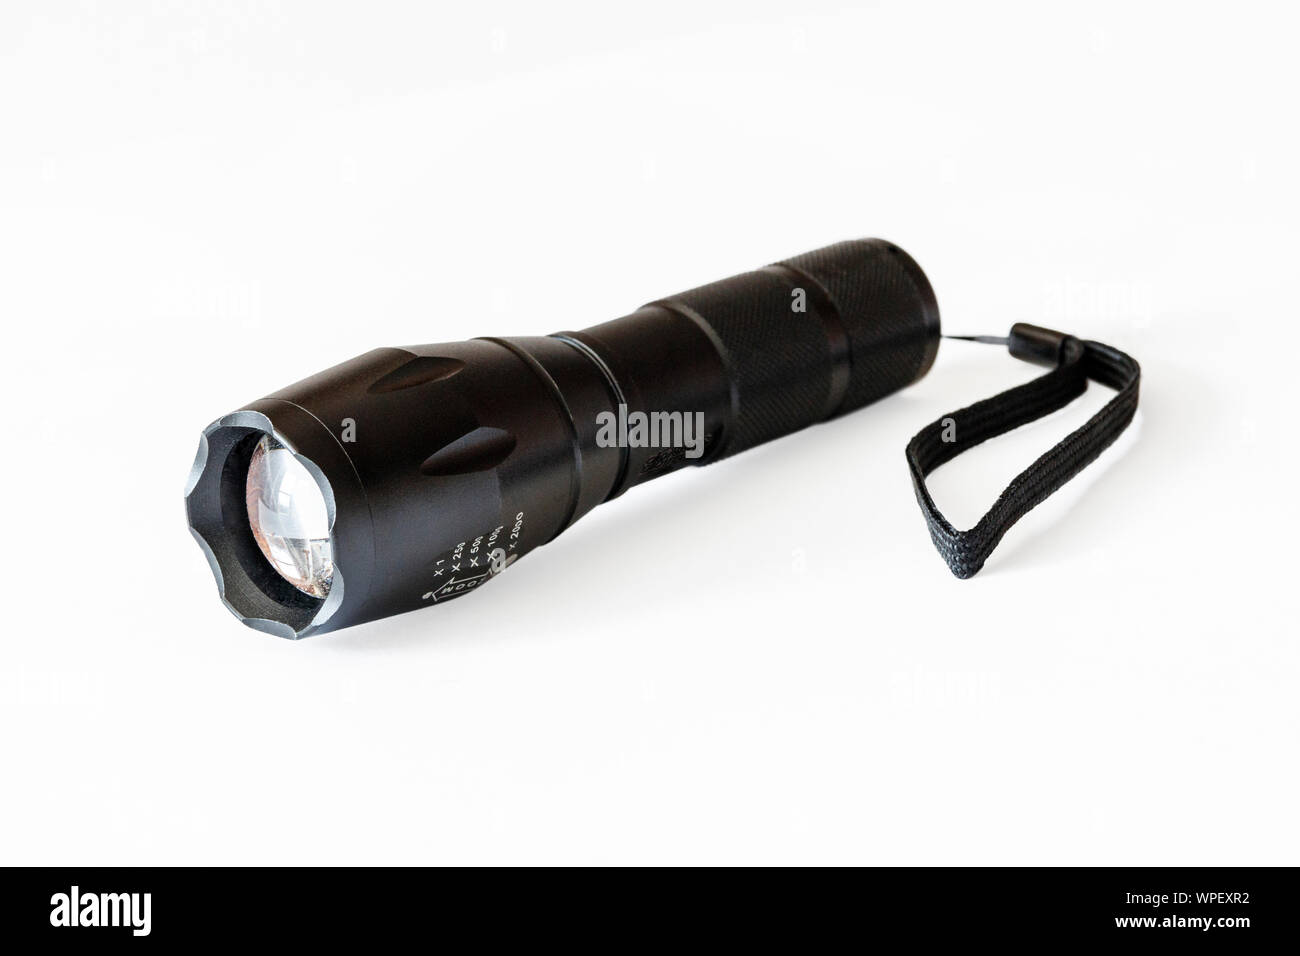 High-power black pocket torch isolated against a white background Stock Photo